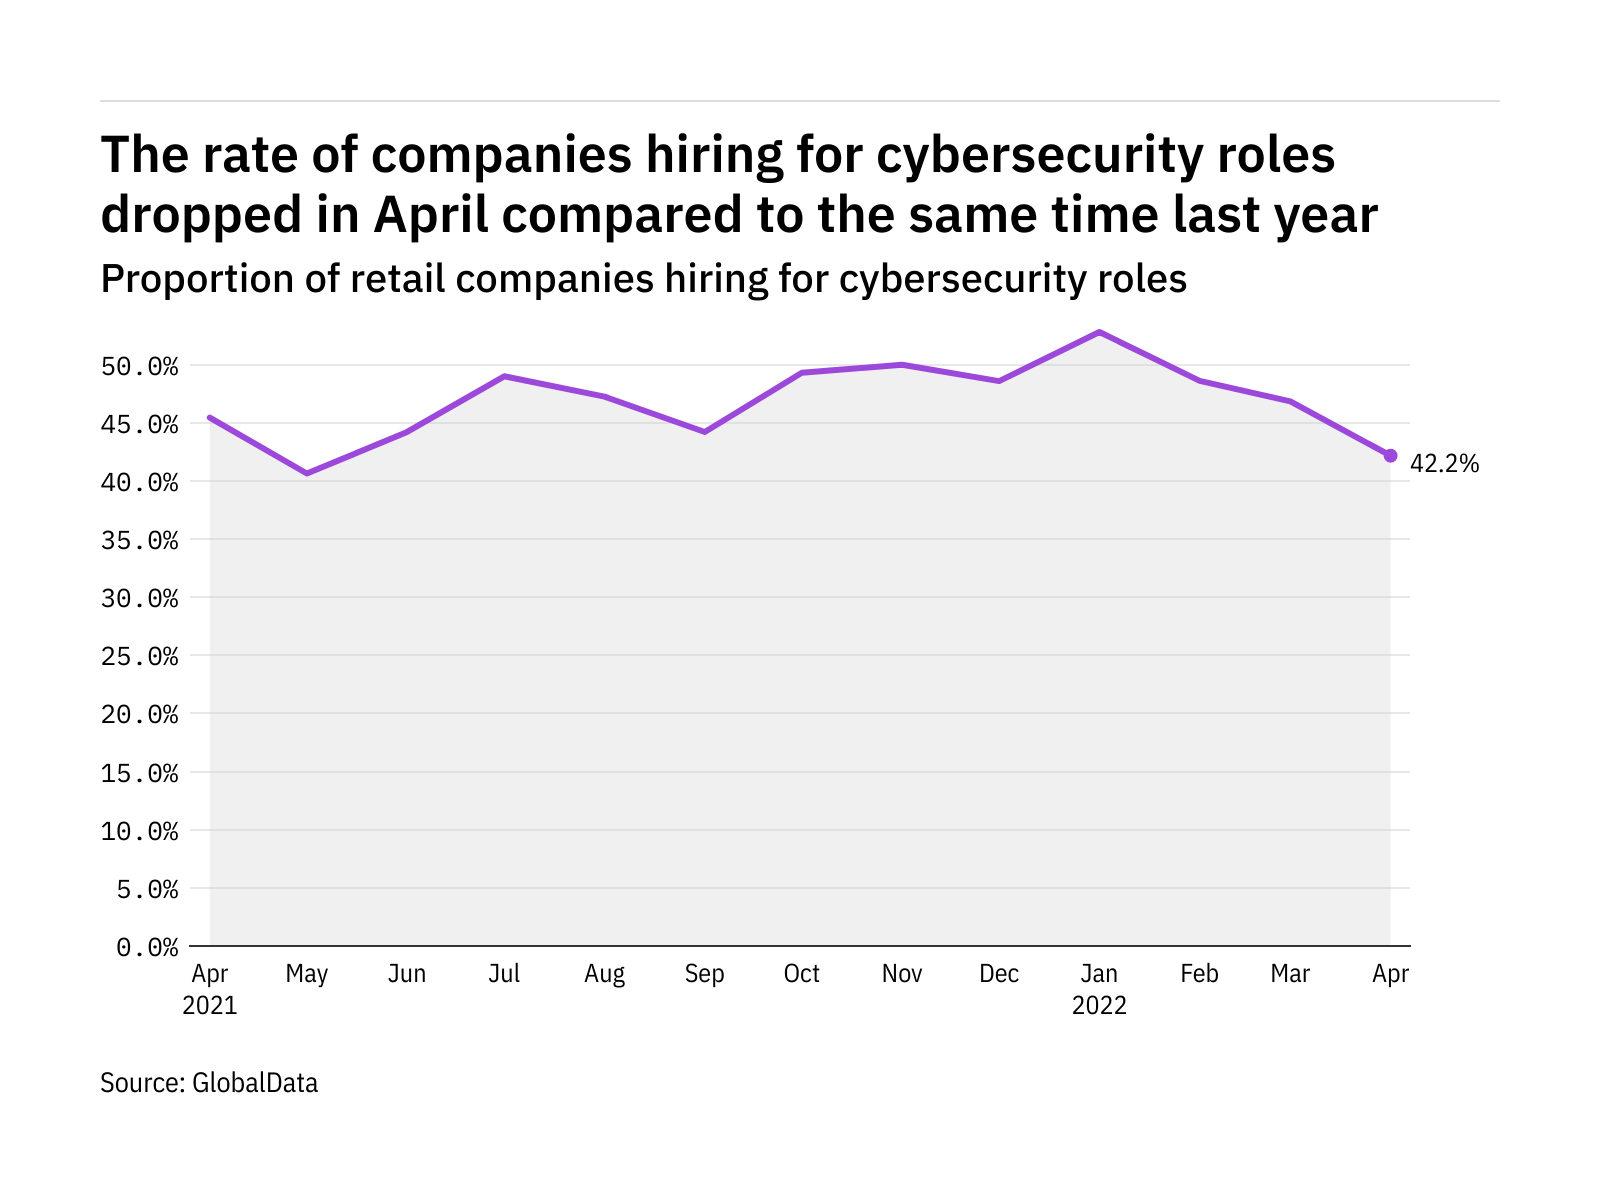 Cybersecurity hiring levels in the retail industry dropped in April 2022